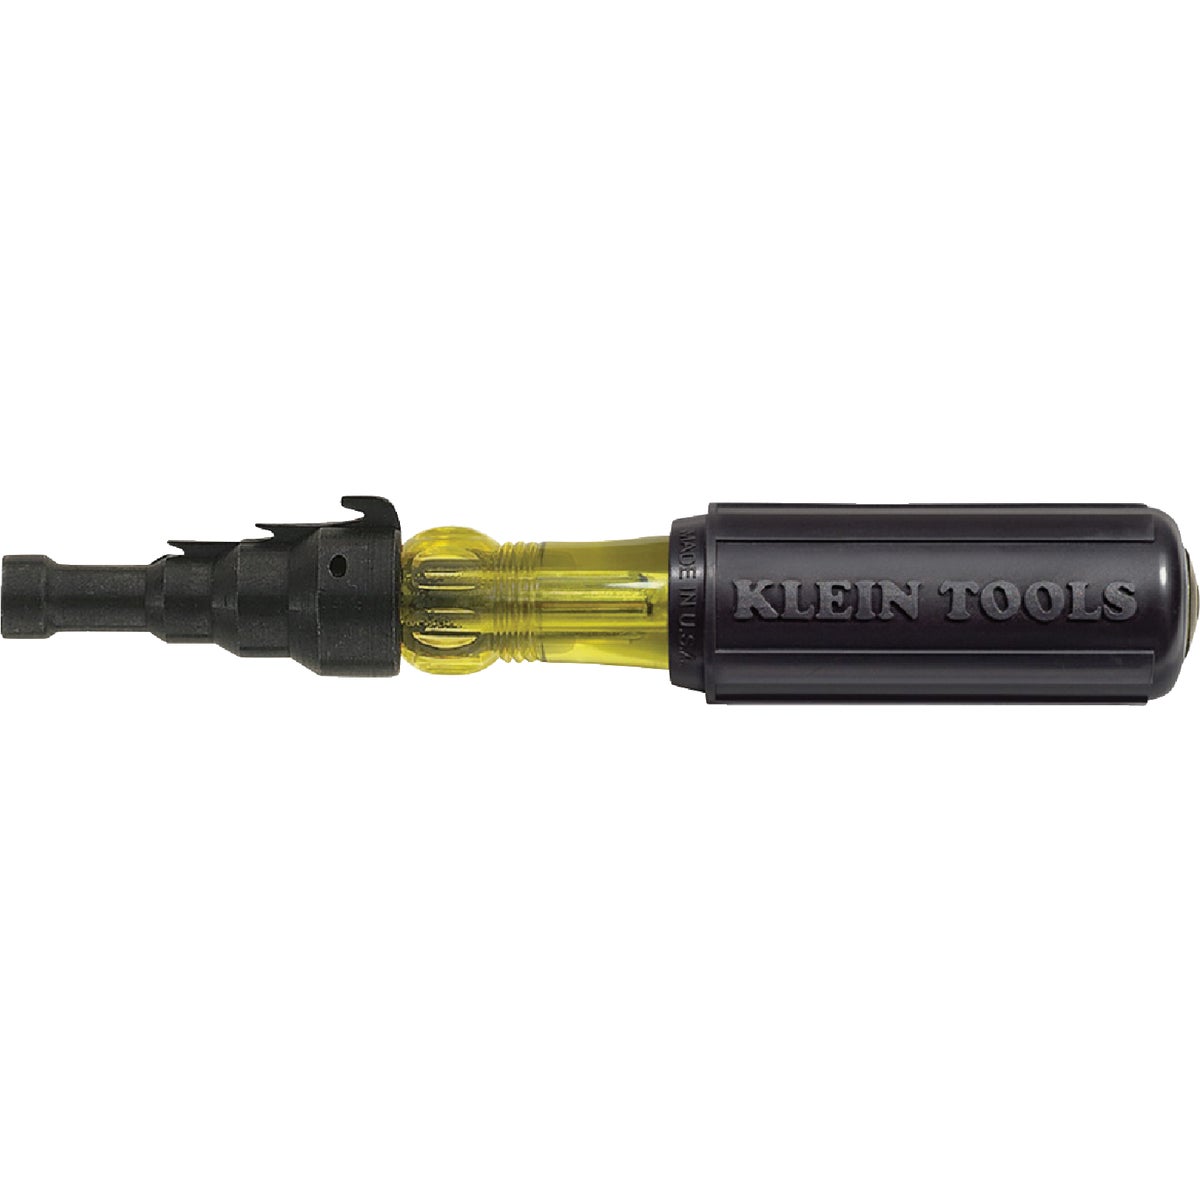 Item 317896, The Klein Tools Conduit-Fitting and Reaming Screwdriver can ream and smooth